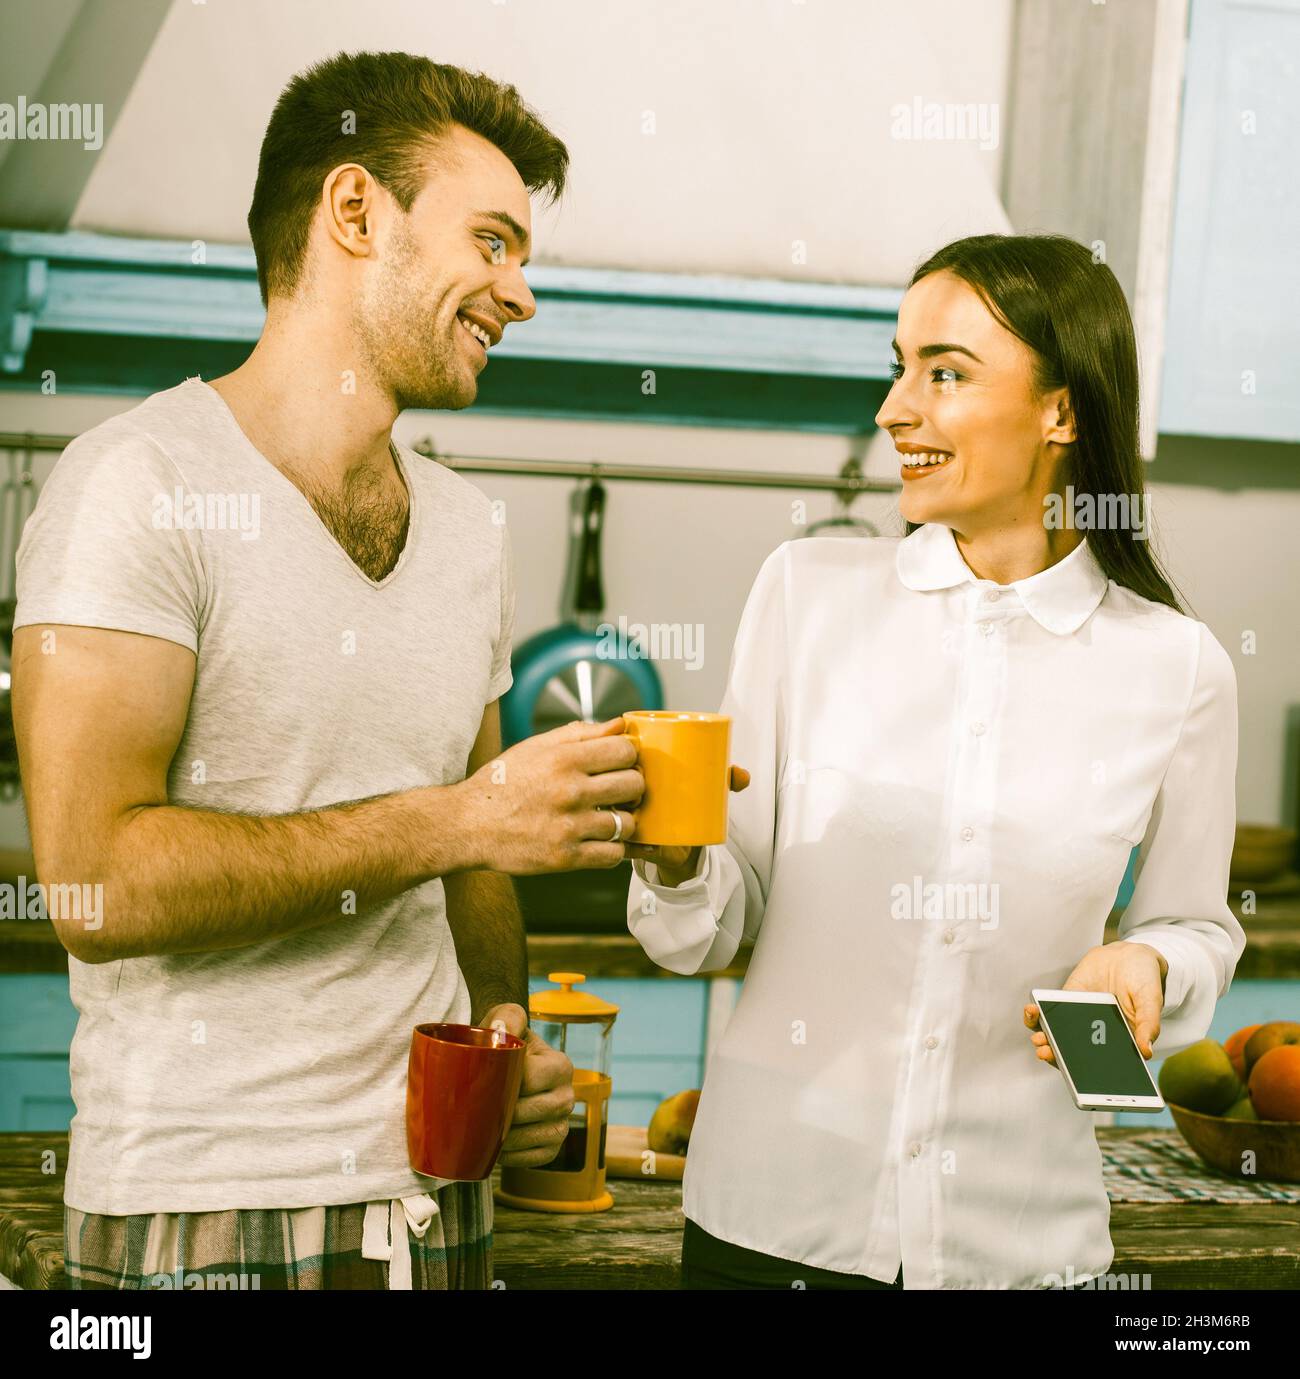 Business Woman With Her Husband In Pyjamas Laughs At Kitchen Stock Photo